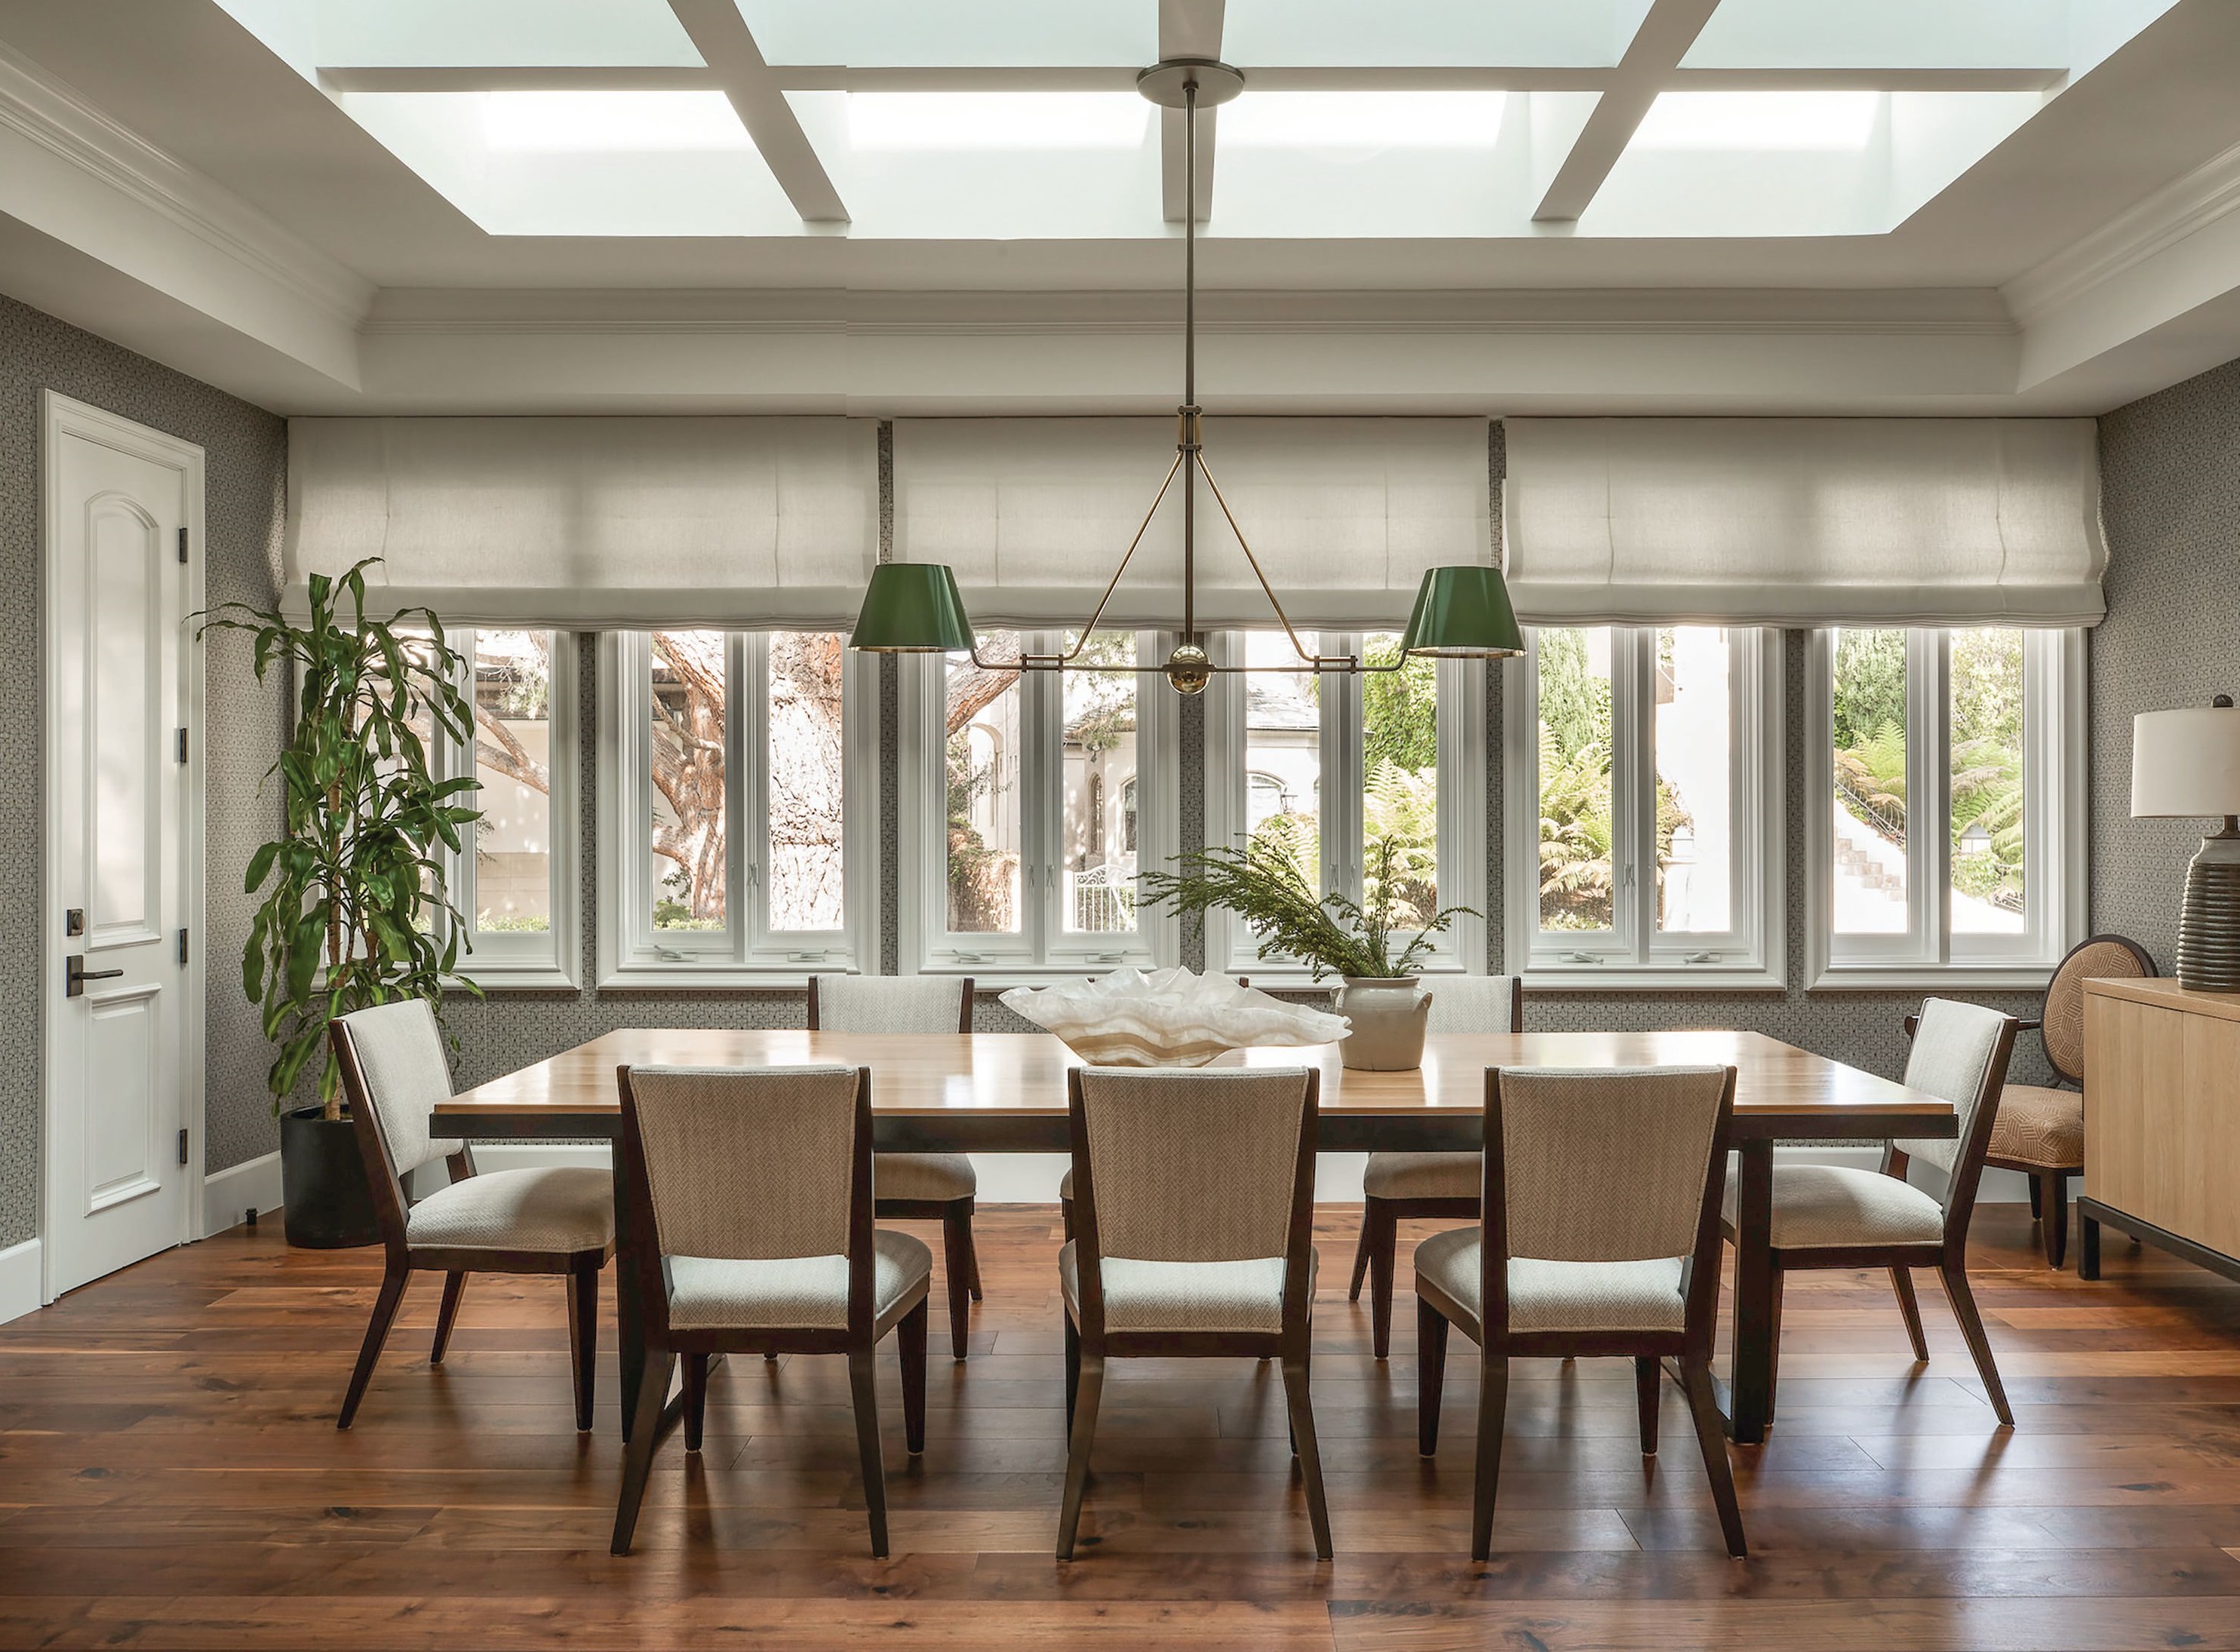 The elegant dining room contains a House of Morrison Montecito table, chairs by Hickory Chair and the Chiltern Double chandelier from Urban Electric. PHOTOGRAPHED BY SHADE DEGGES